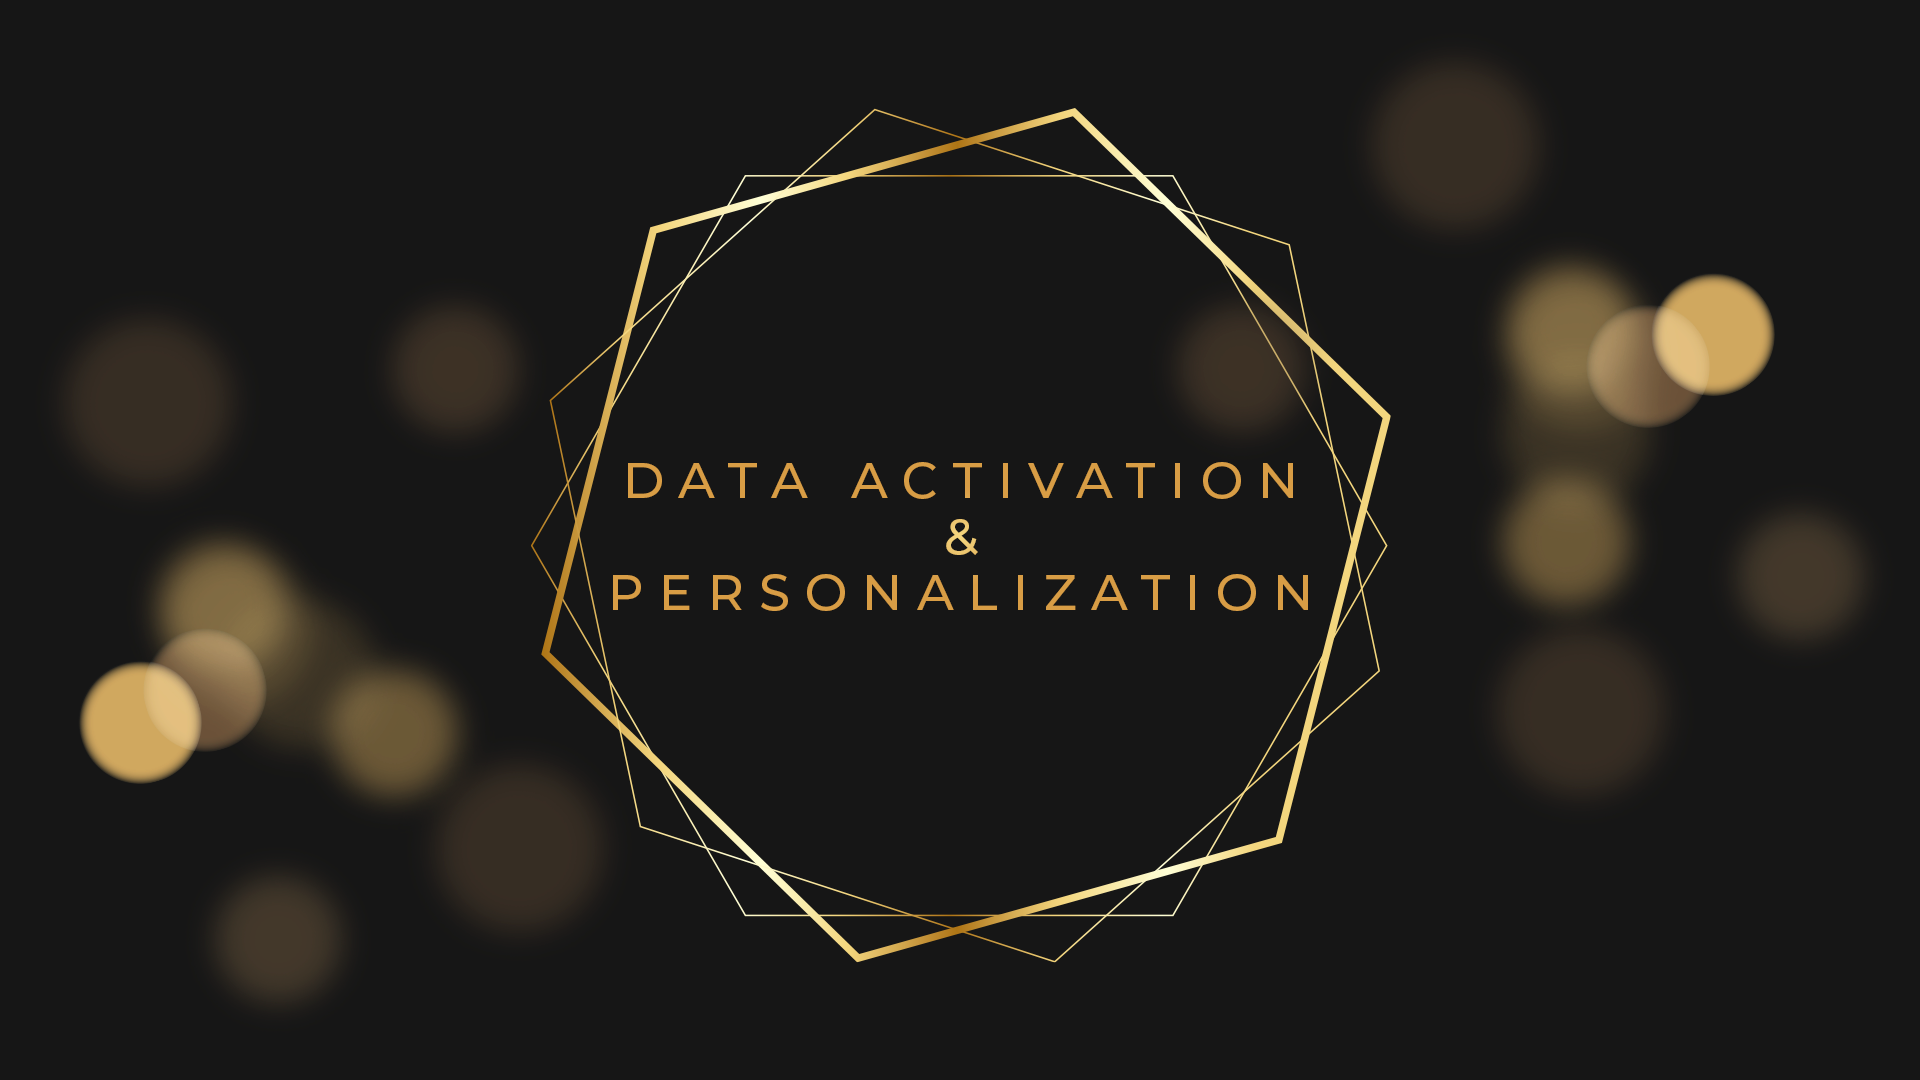 Data Activation & Personalization